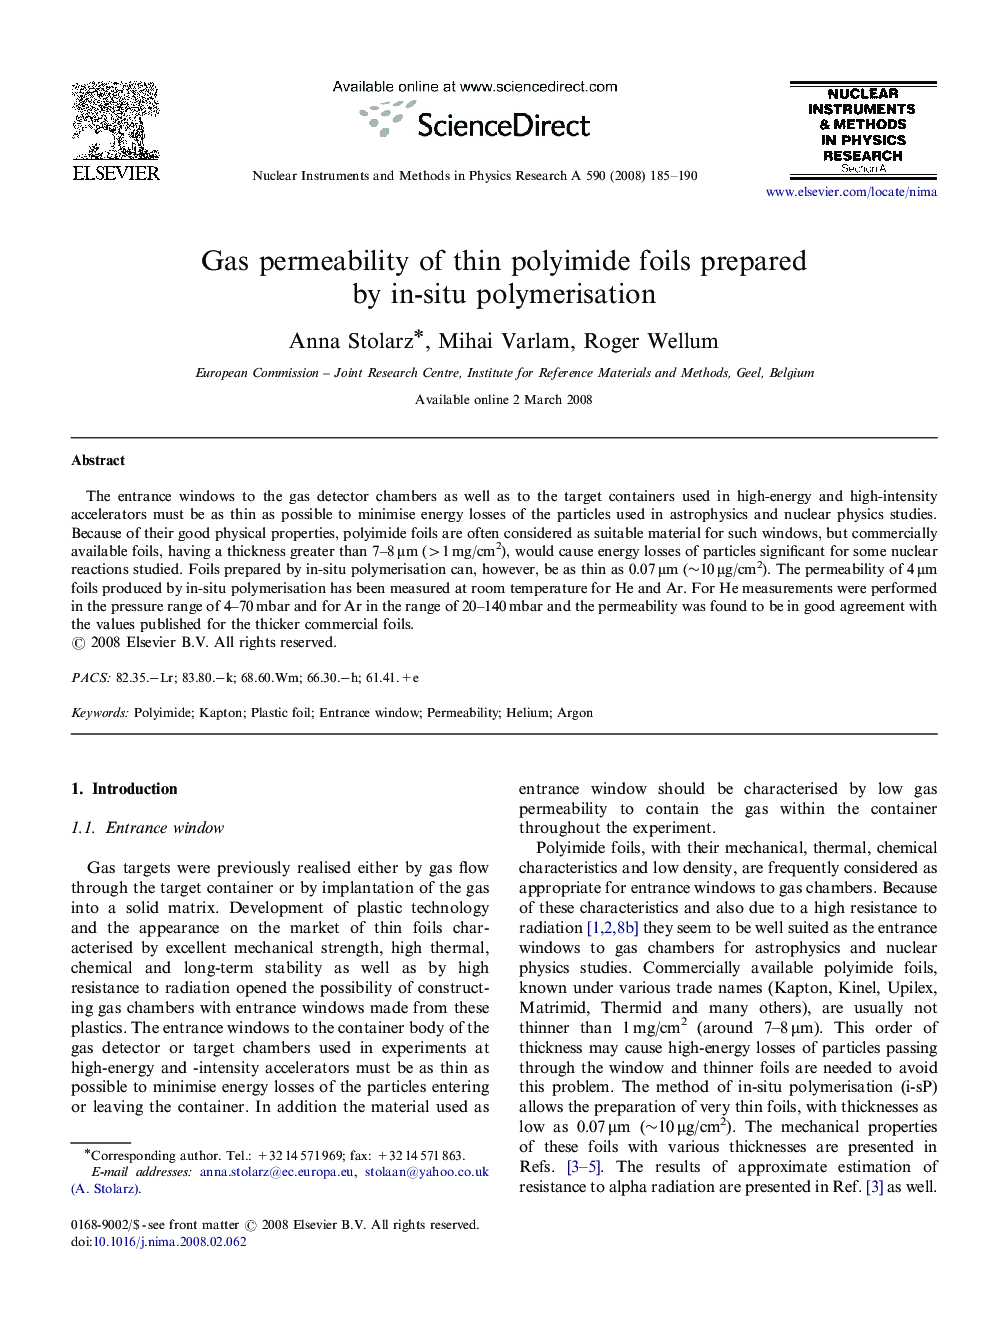 Gas permeability of thin polyimide foils prepared by in-situ polymerisation